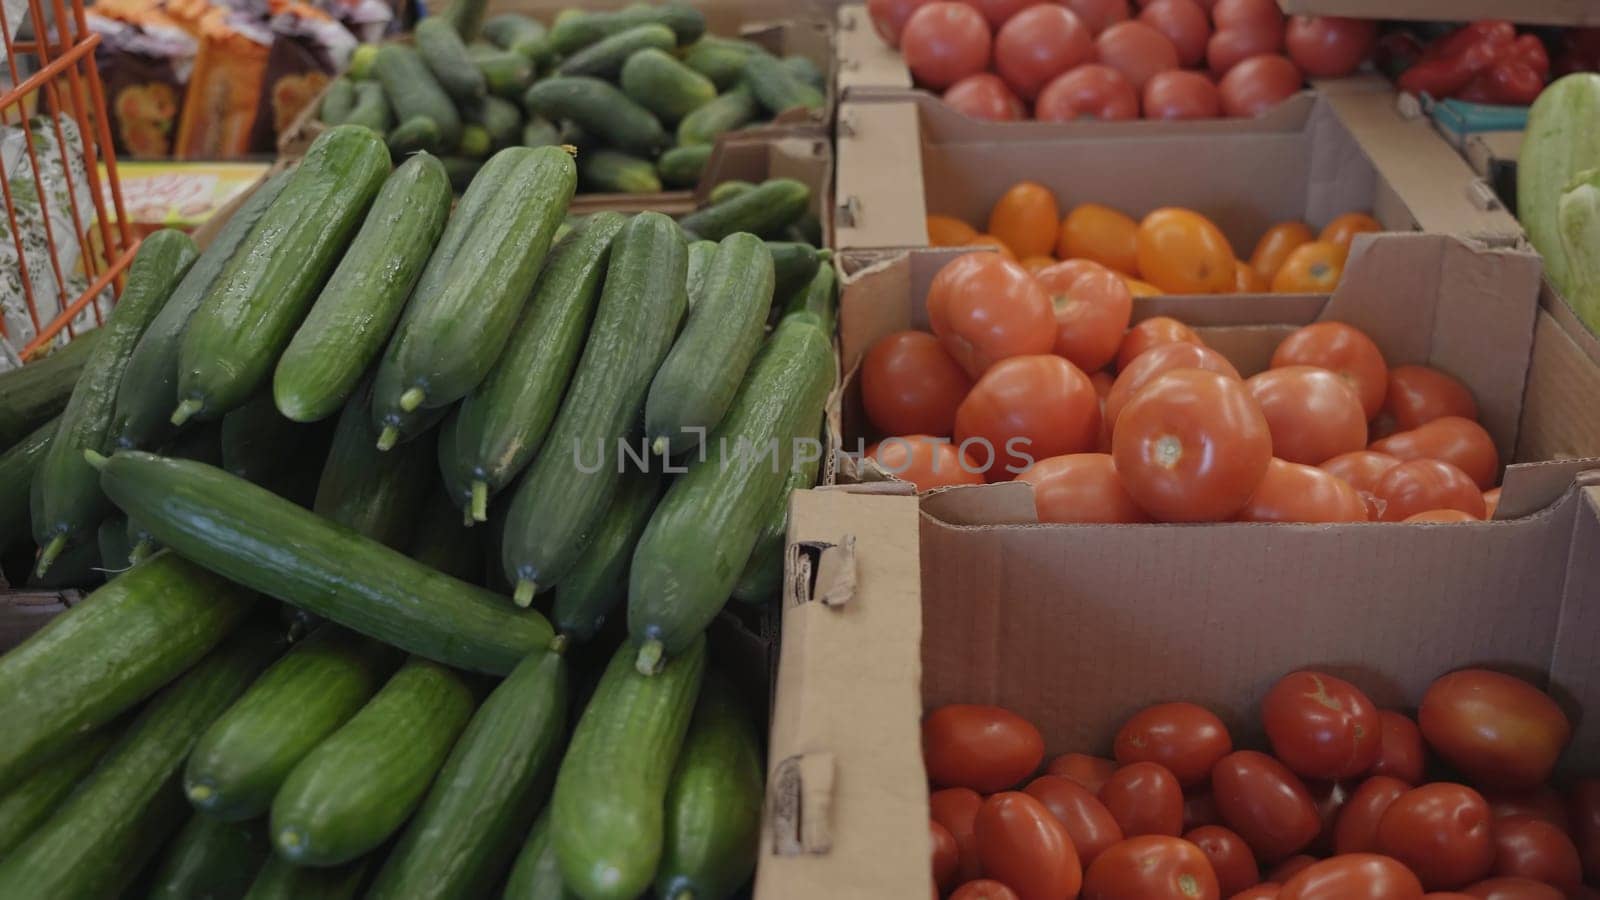 Tomatoes and cucumbers in the boxes of a large store. by DovidPro